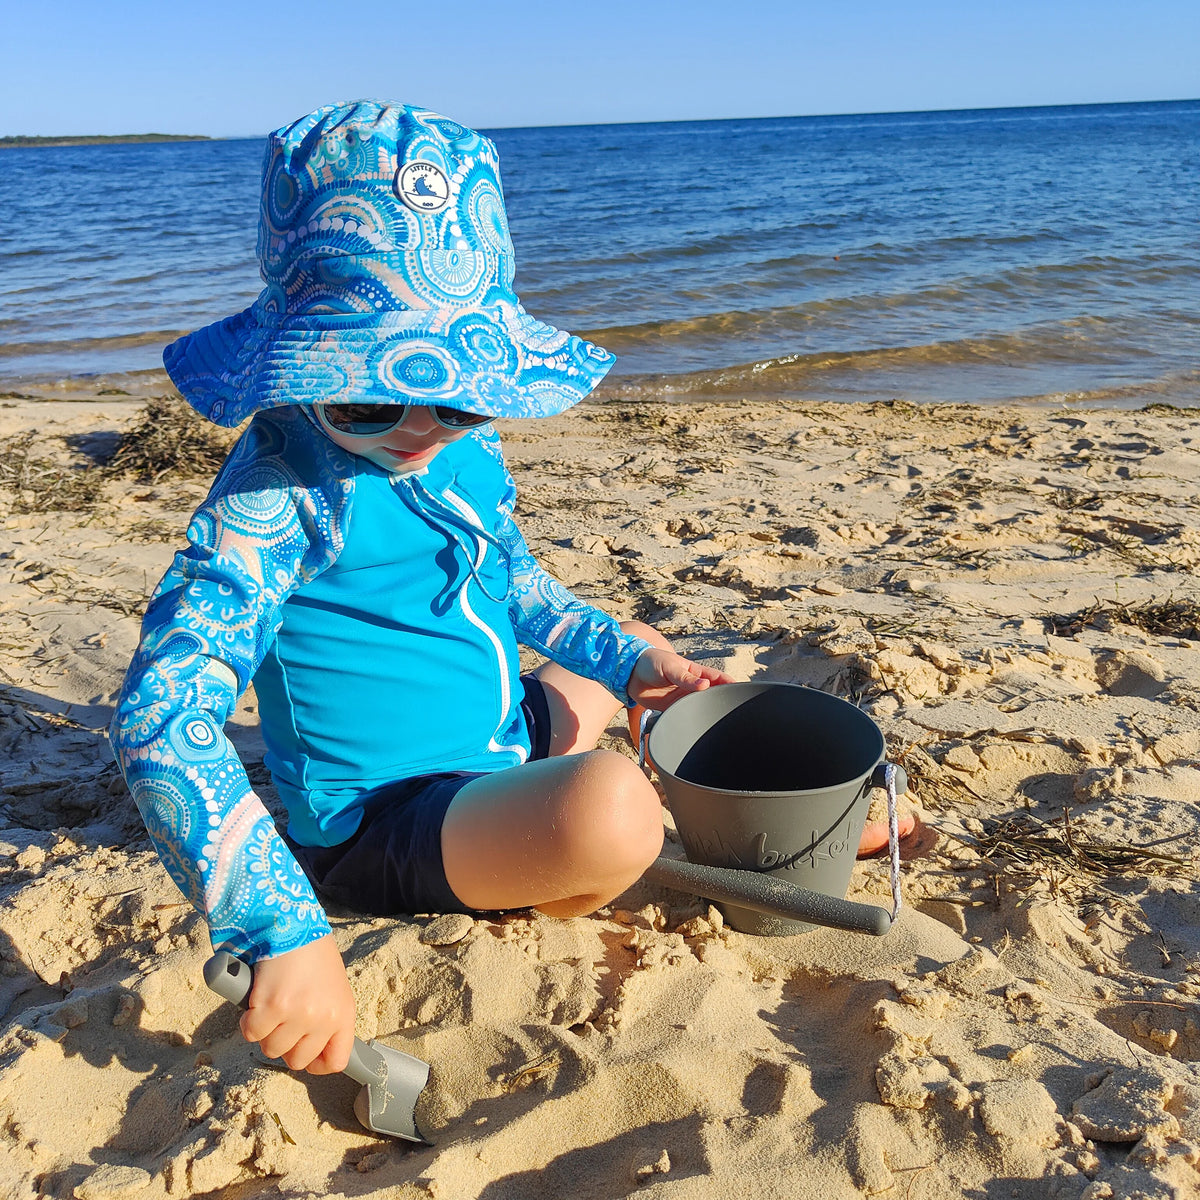 Little E & Co - Reversible Swim Hat | Called Home to the Ocean